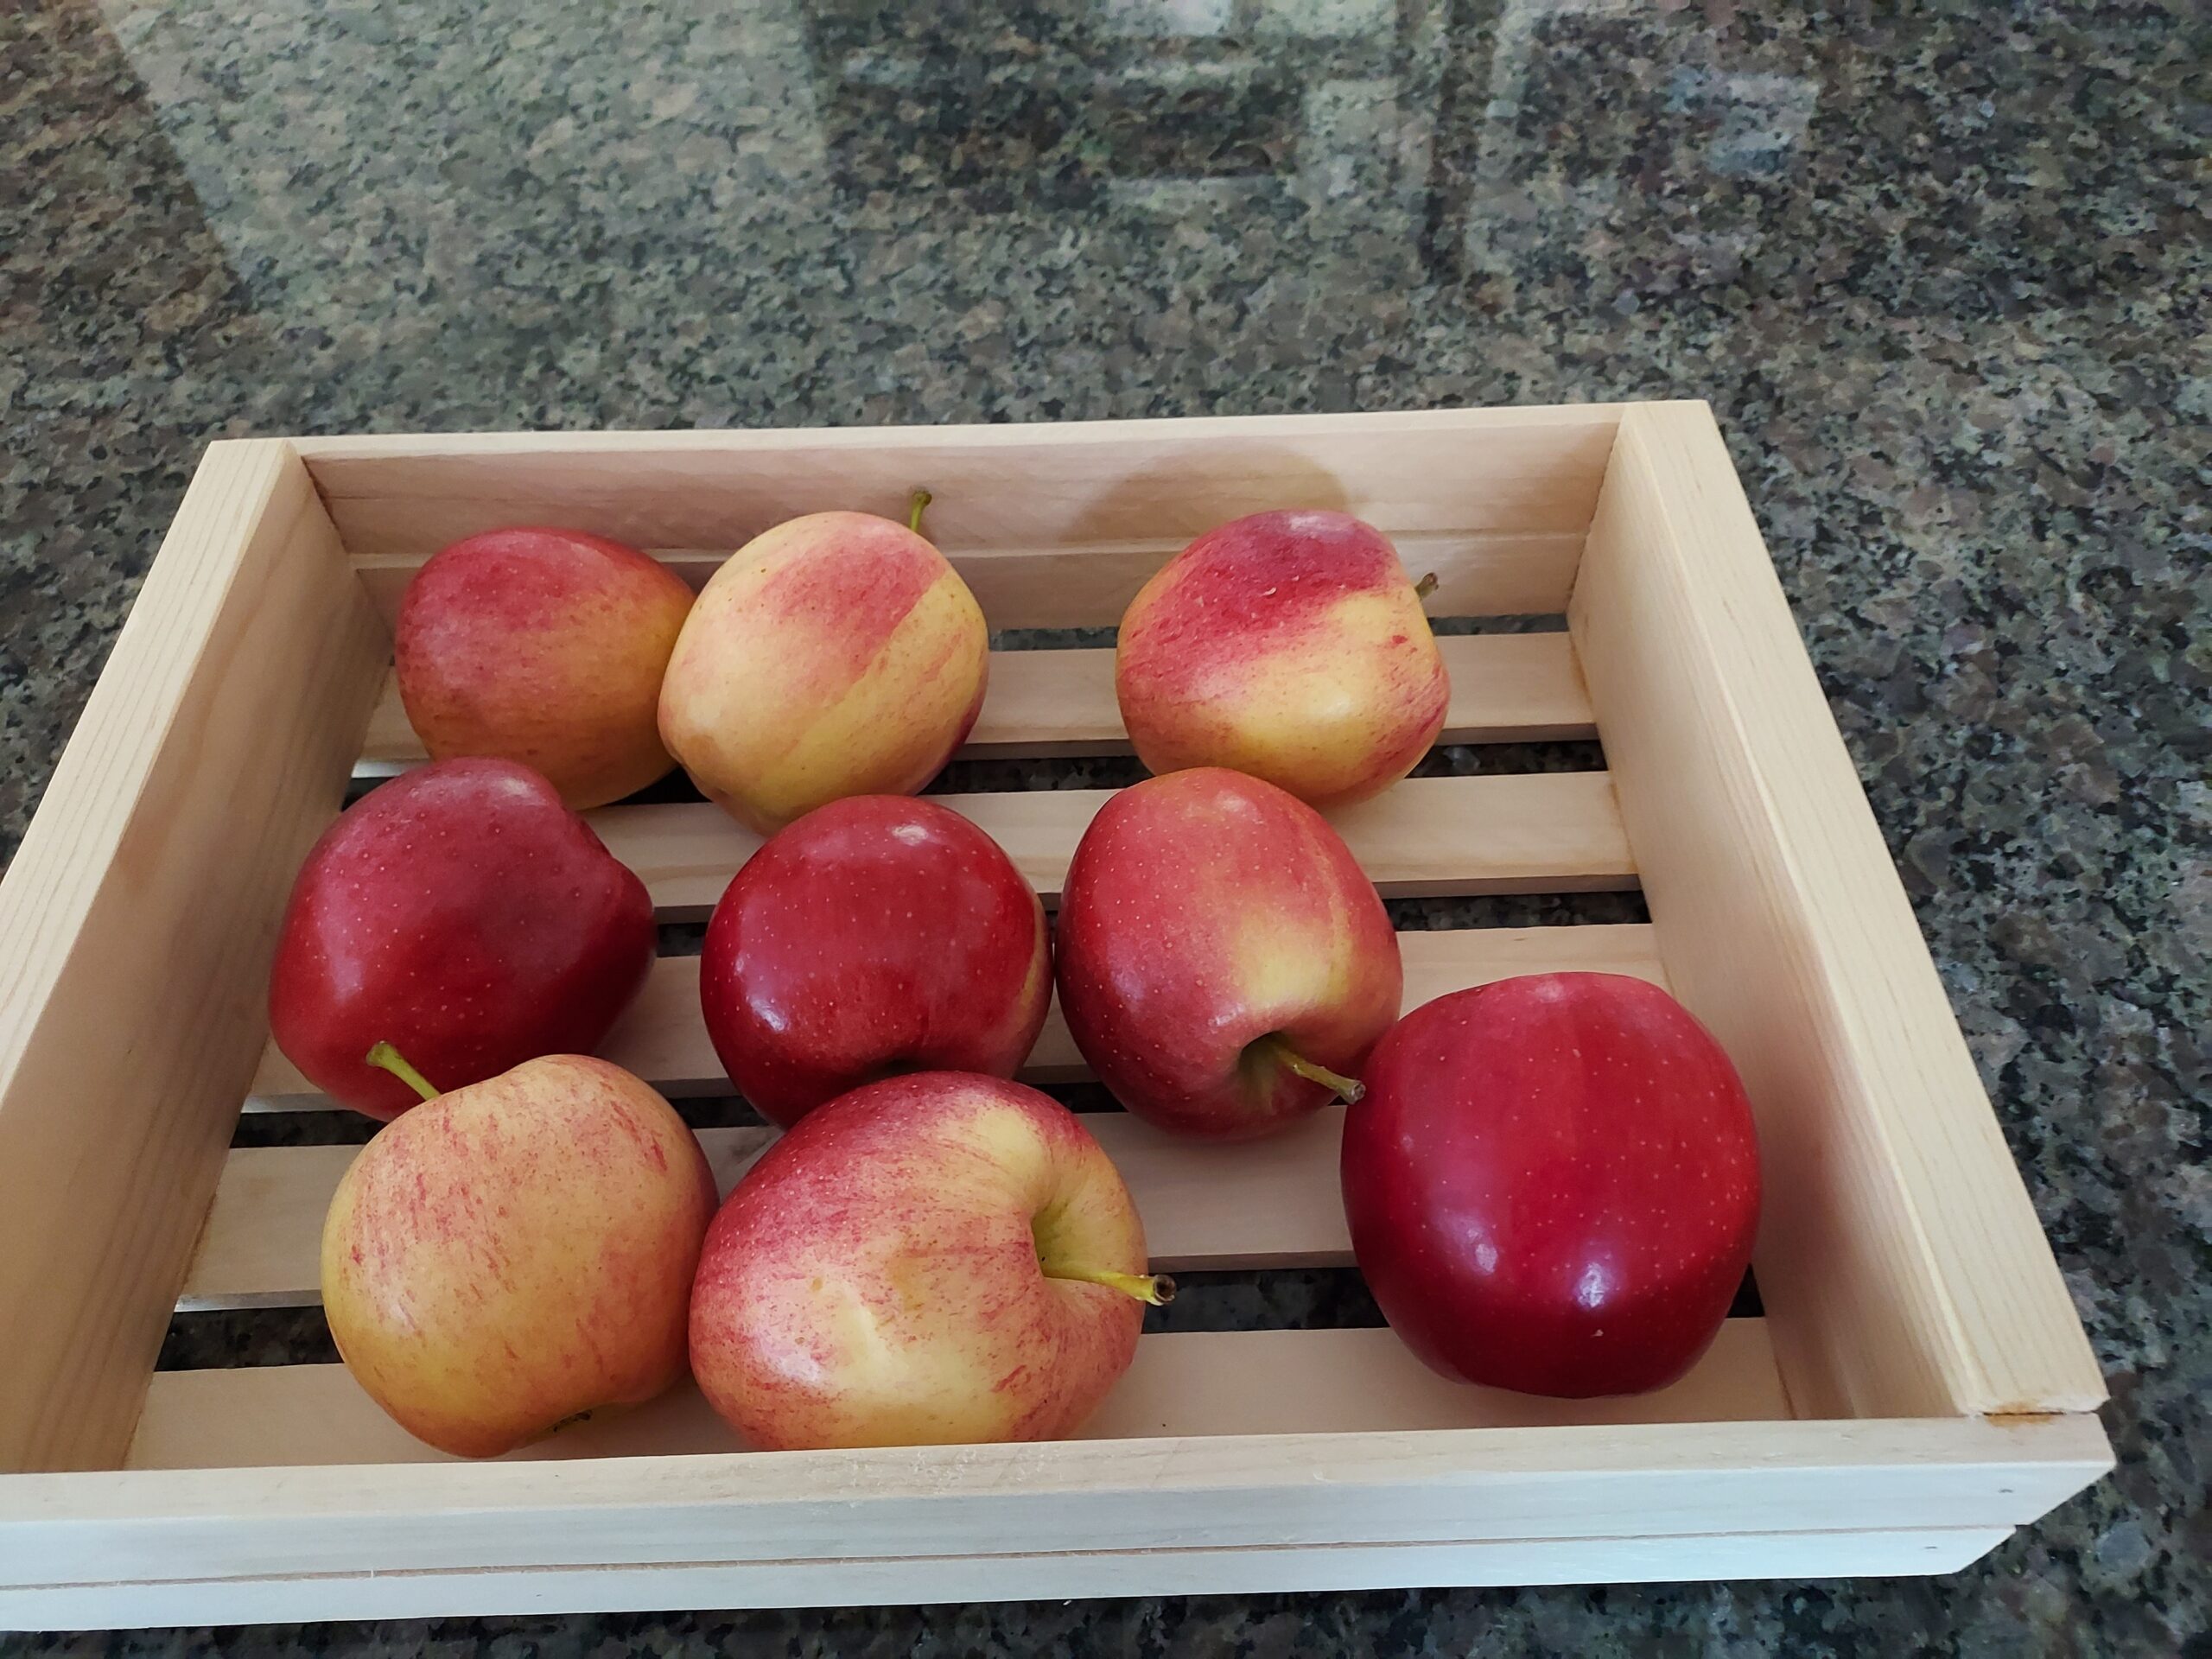 Apples in the counter for fruit crate